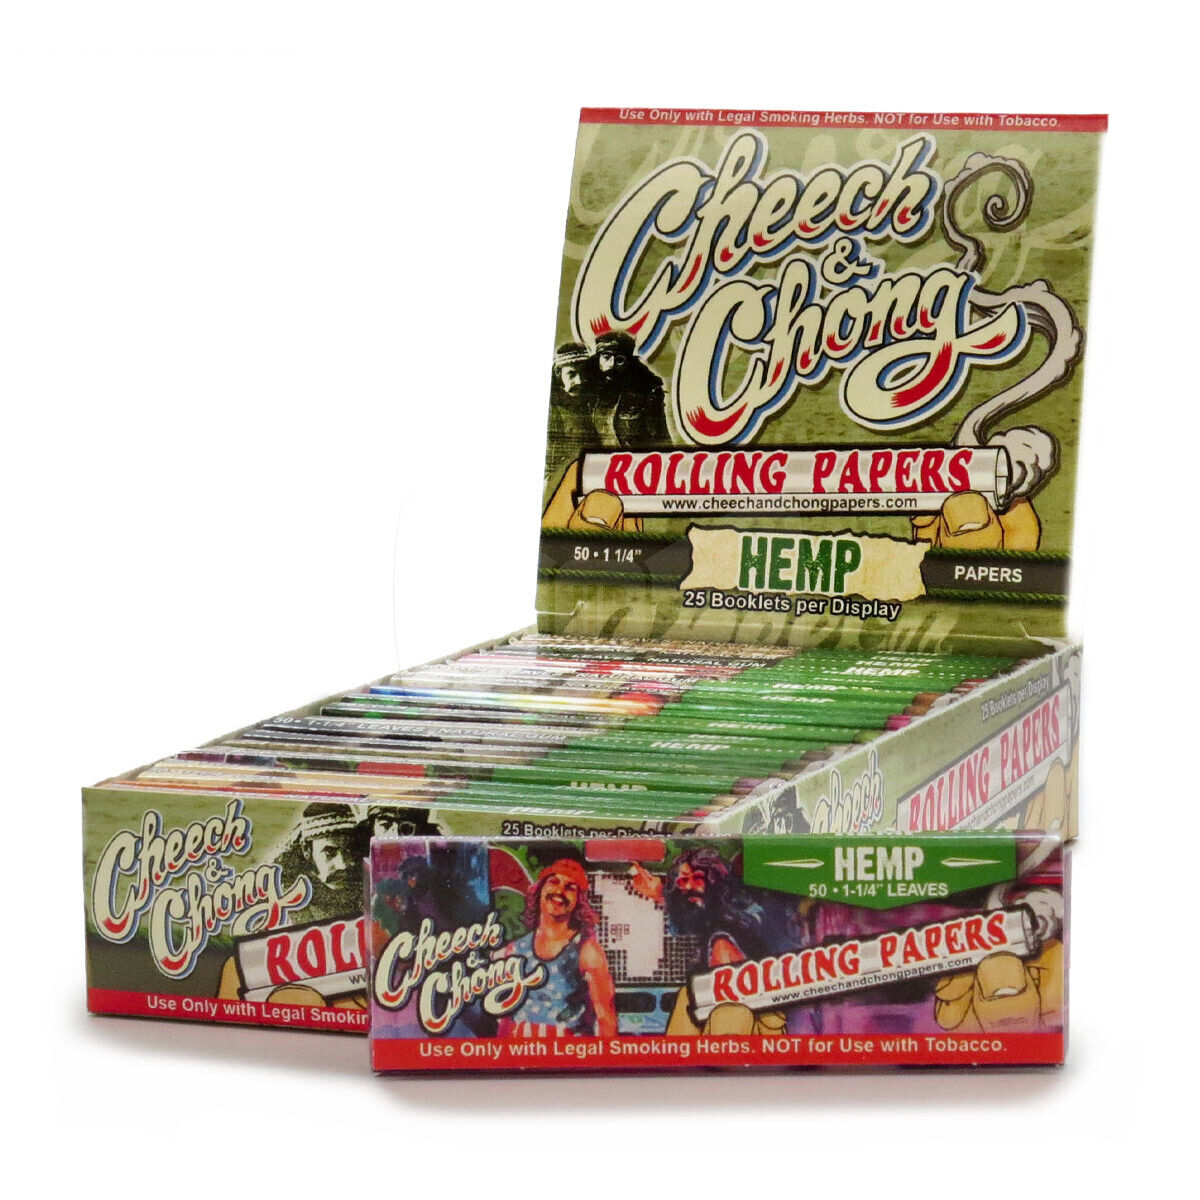 Cheech & And Chong Hemp 1 1/4 Box of Rolling Papers 25 Packs